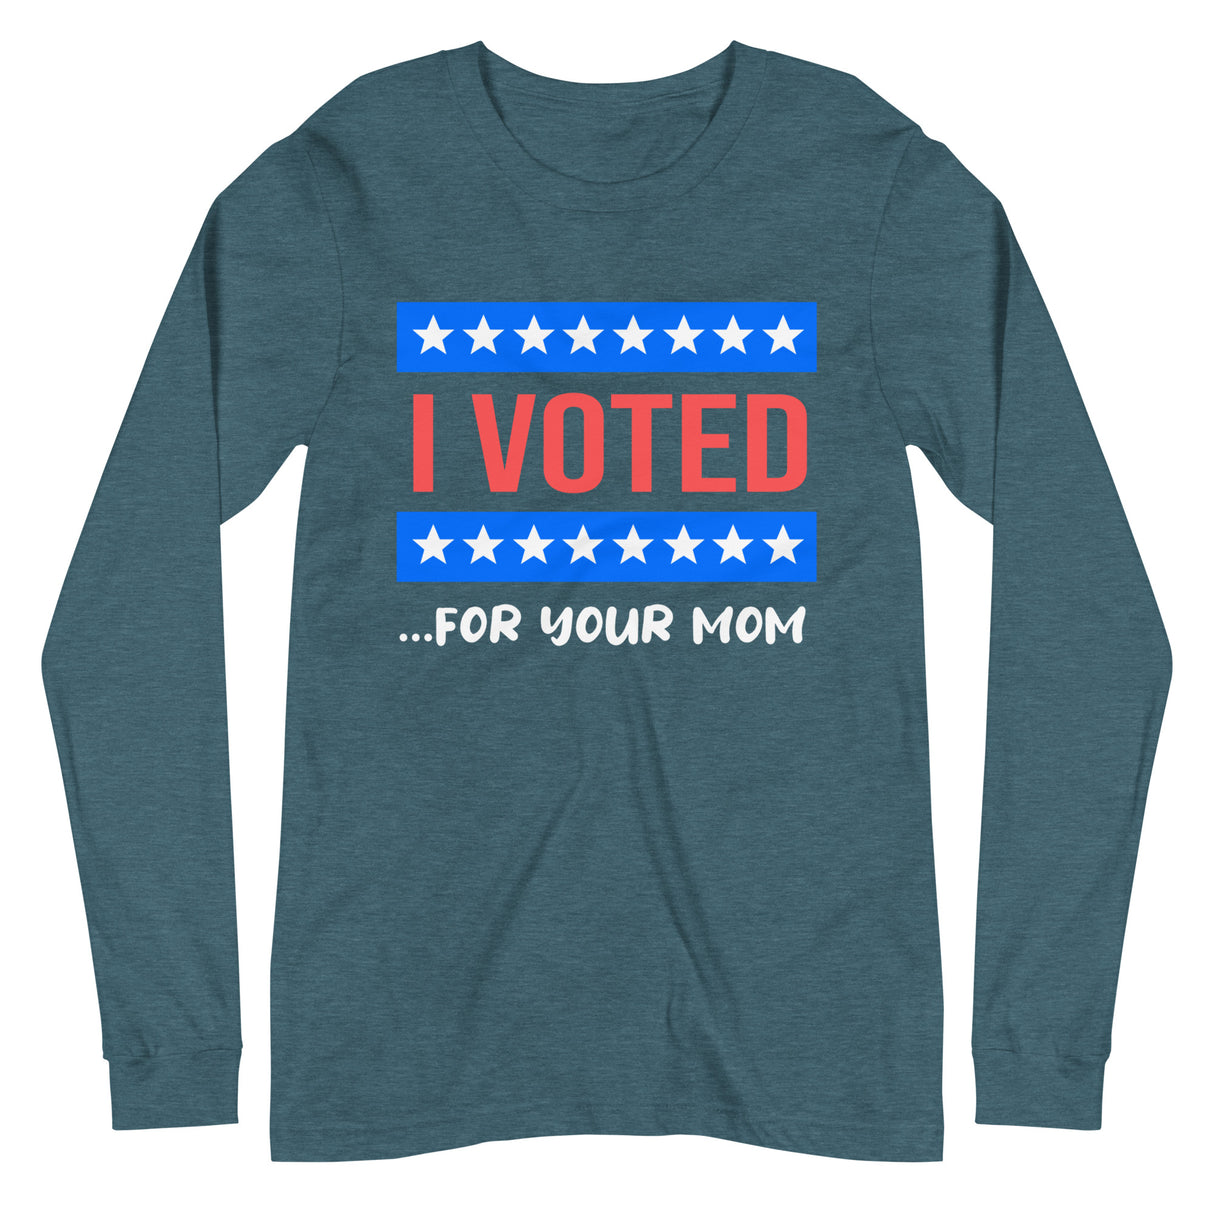 I Voted For Your Mom Premium Long Sleeve Shirt - Libertarian Country